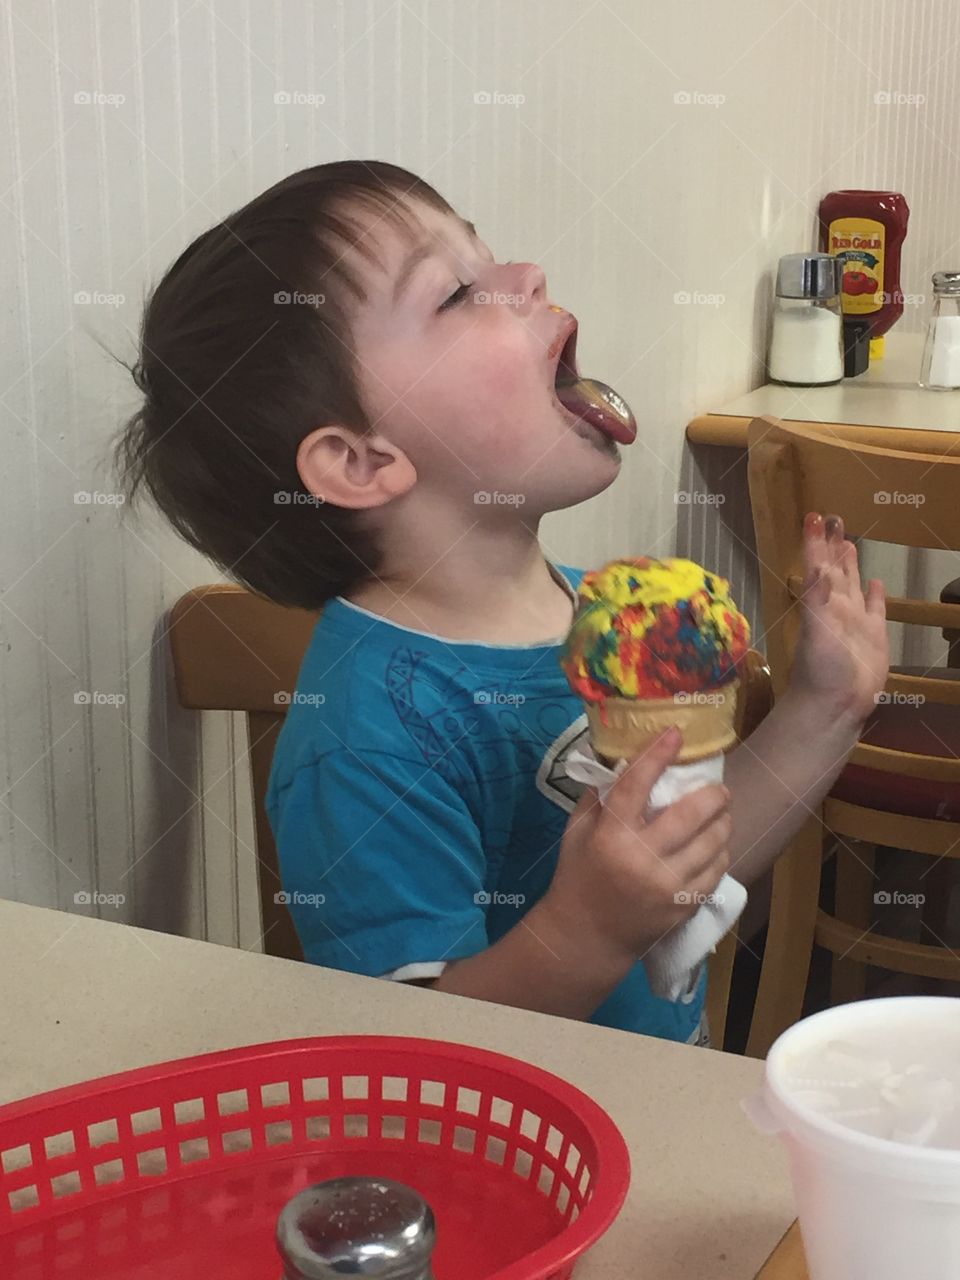 Little boy sitting on chair with ice cream cone